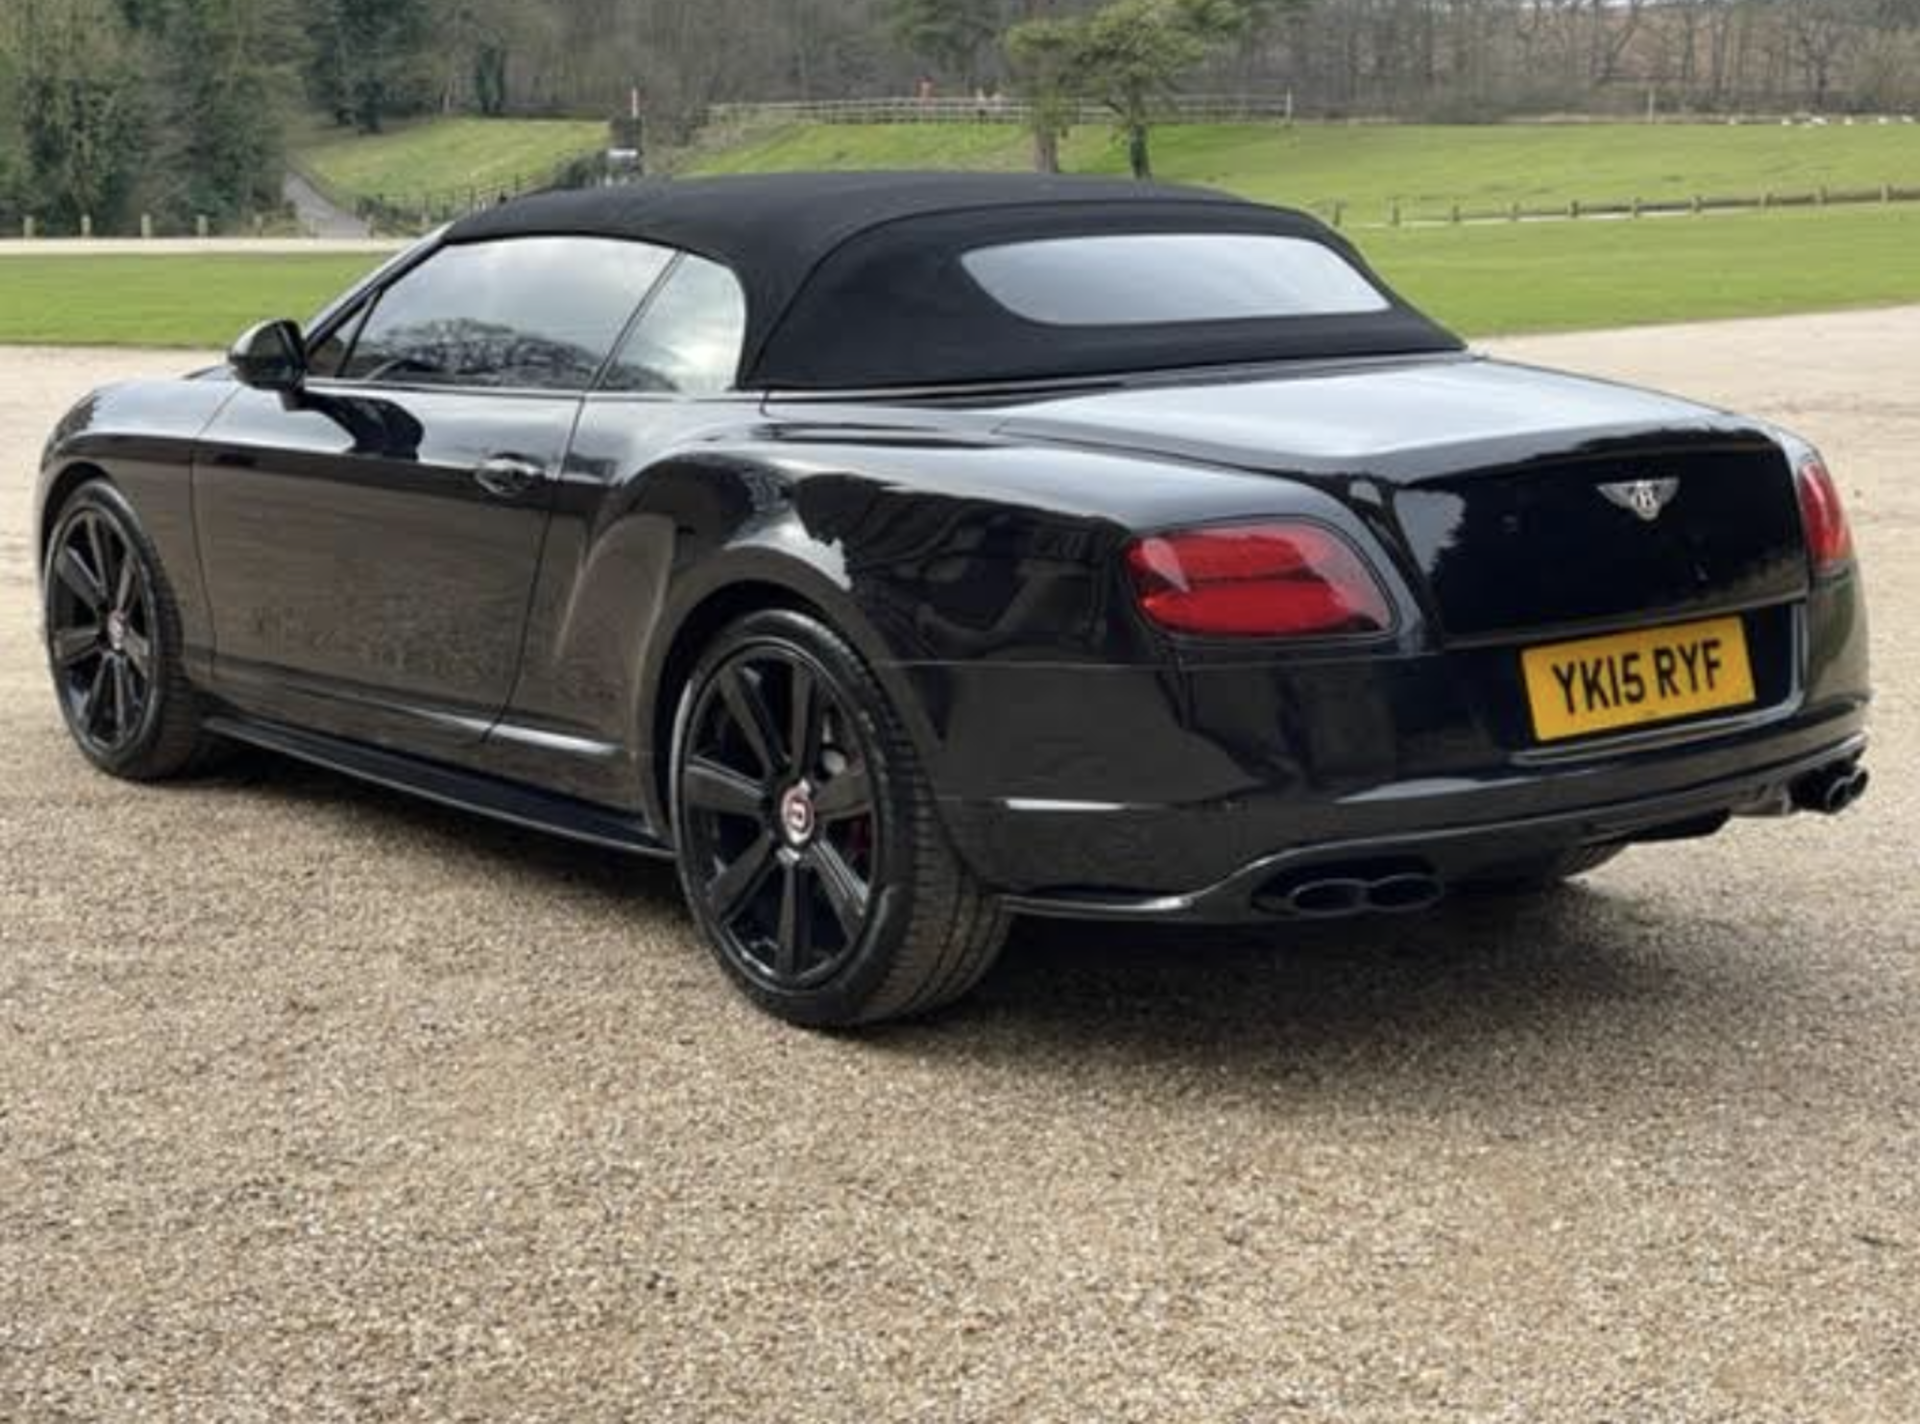 2015 Bentley Continental GTC 4.0 V8 S 2dr Auto Concourse series - Black pack 58,000 miles Full S/H - Image 5 of 18